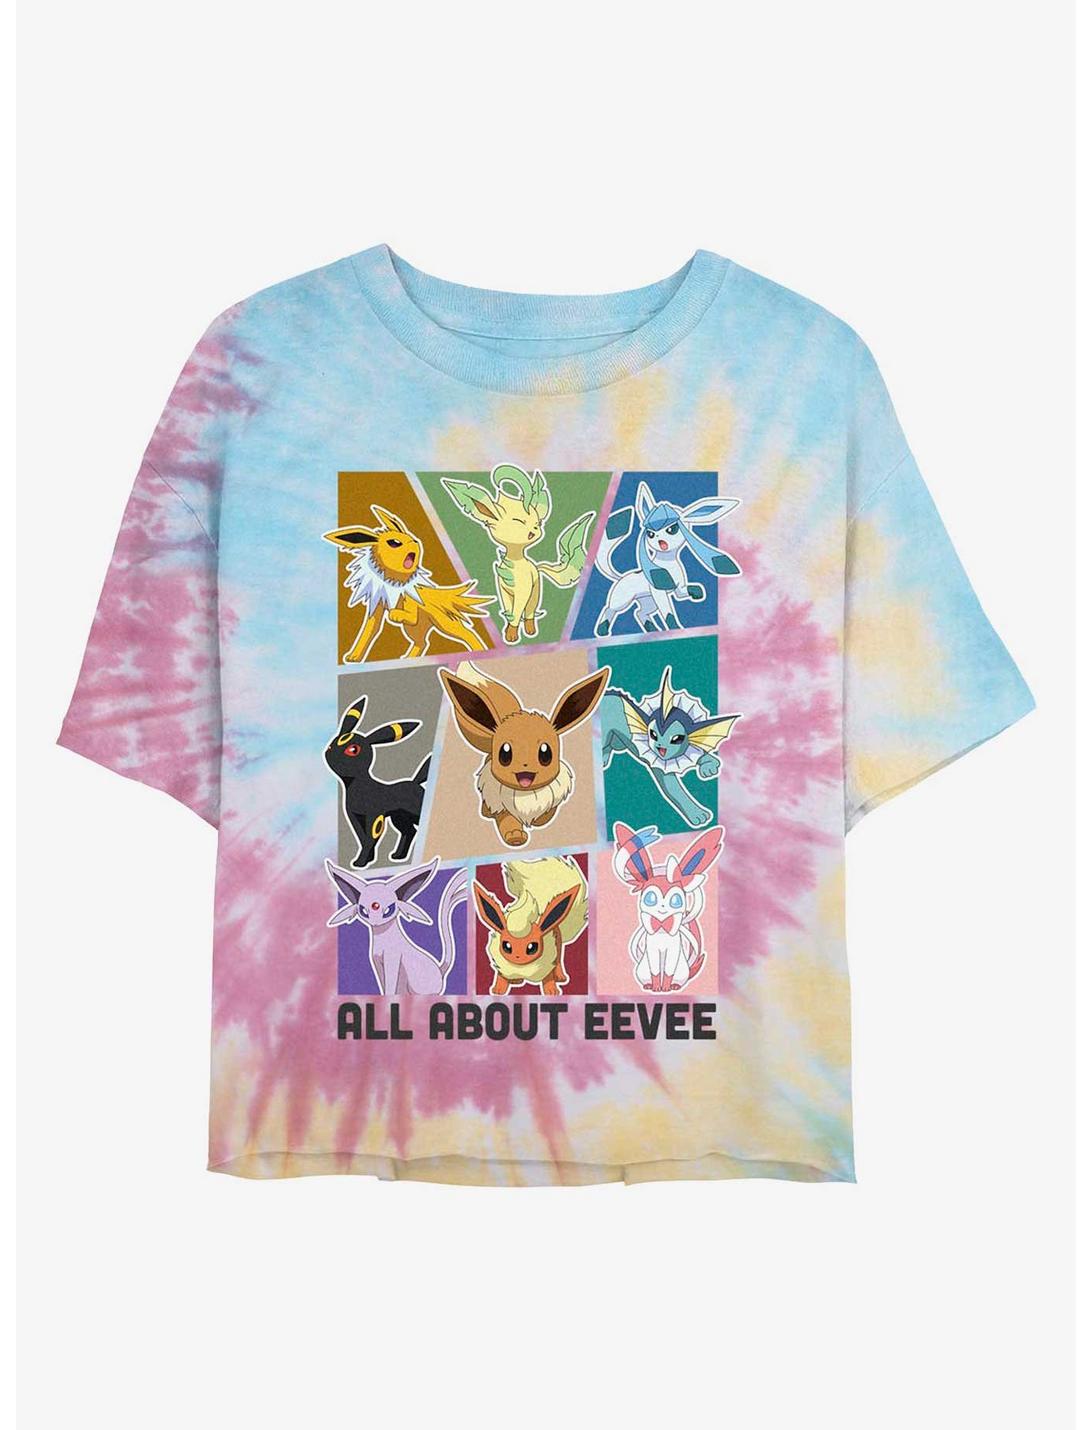 Pokemon All About Eevee Tie-Dye Girls Crop T-Shirt, BLUPNKLY, hi-res